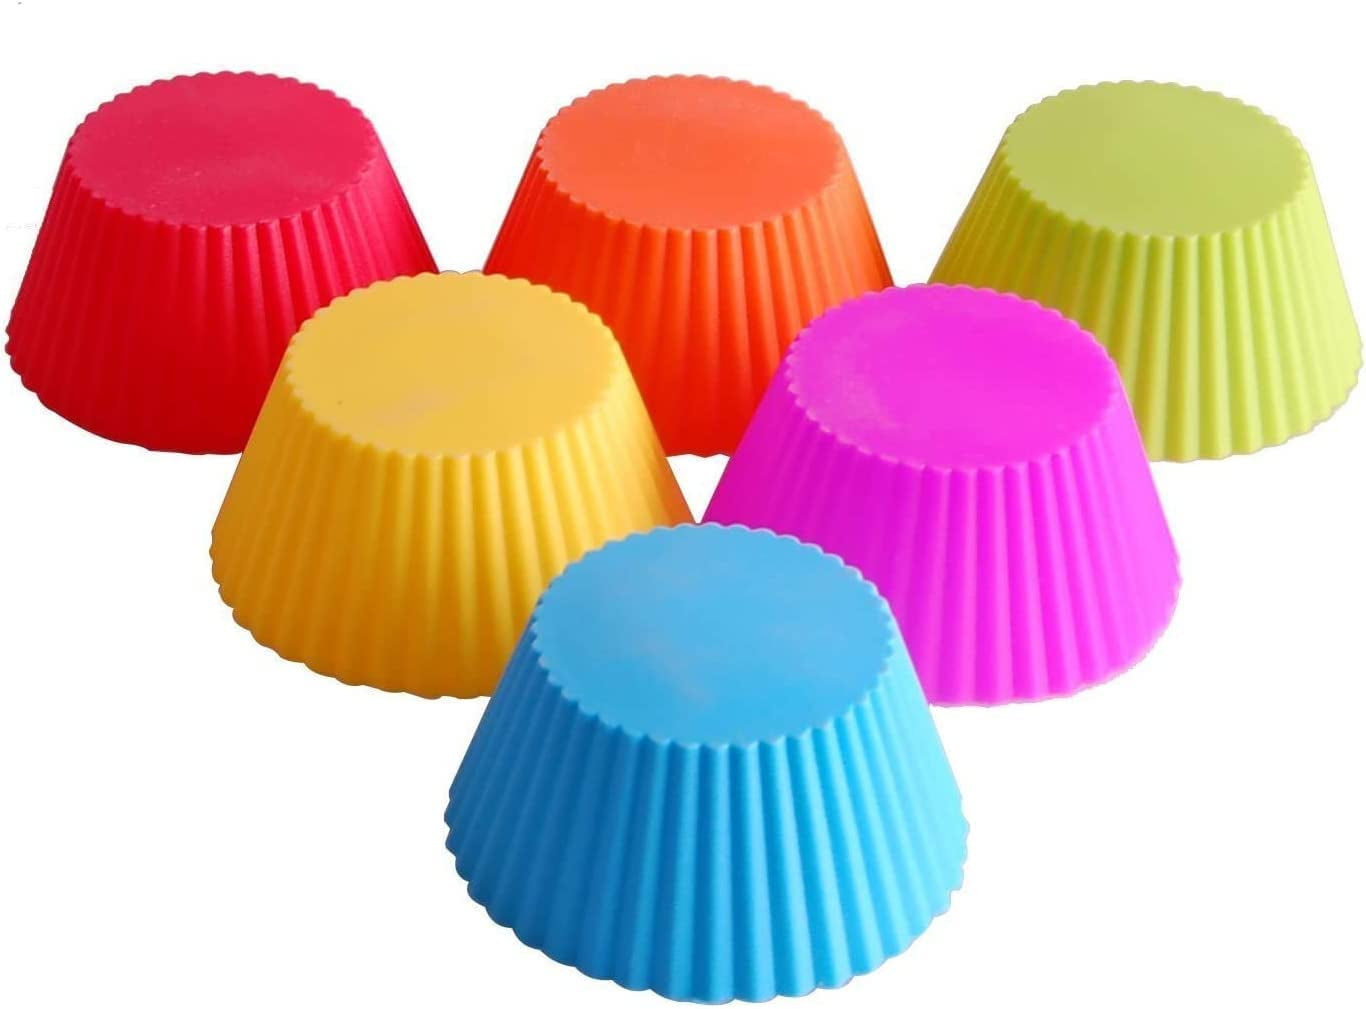 Cupcake Molds, 24 Pack Reusable Silicone Baking Cases Muffin Molds